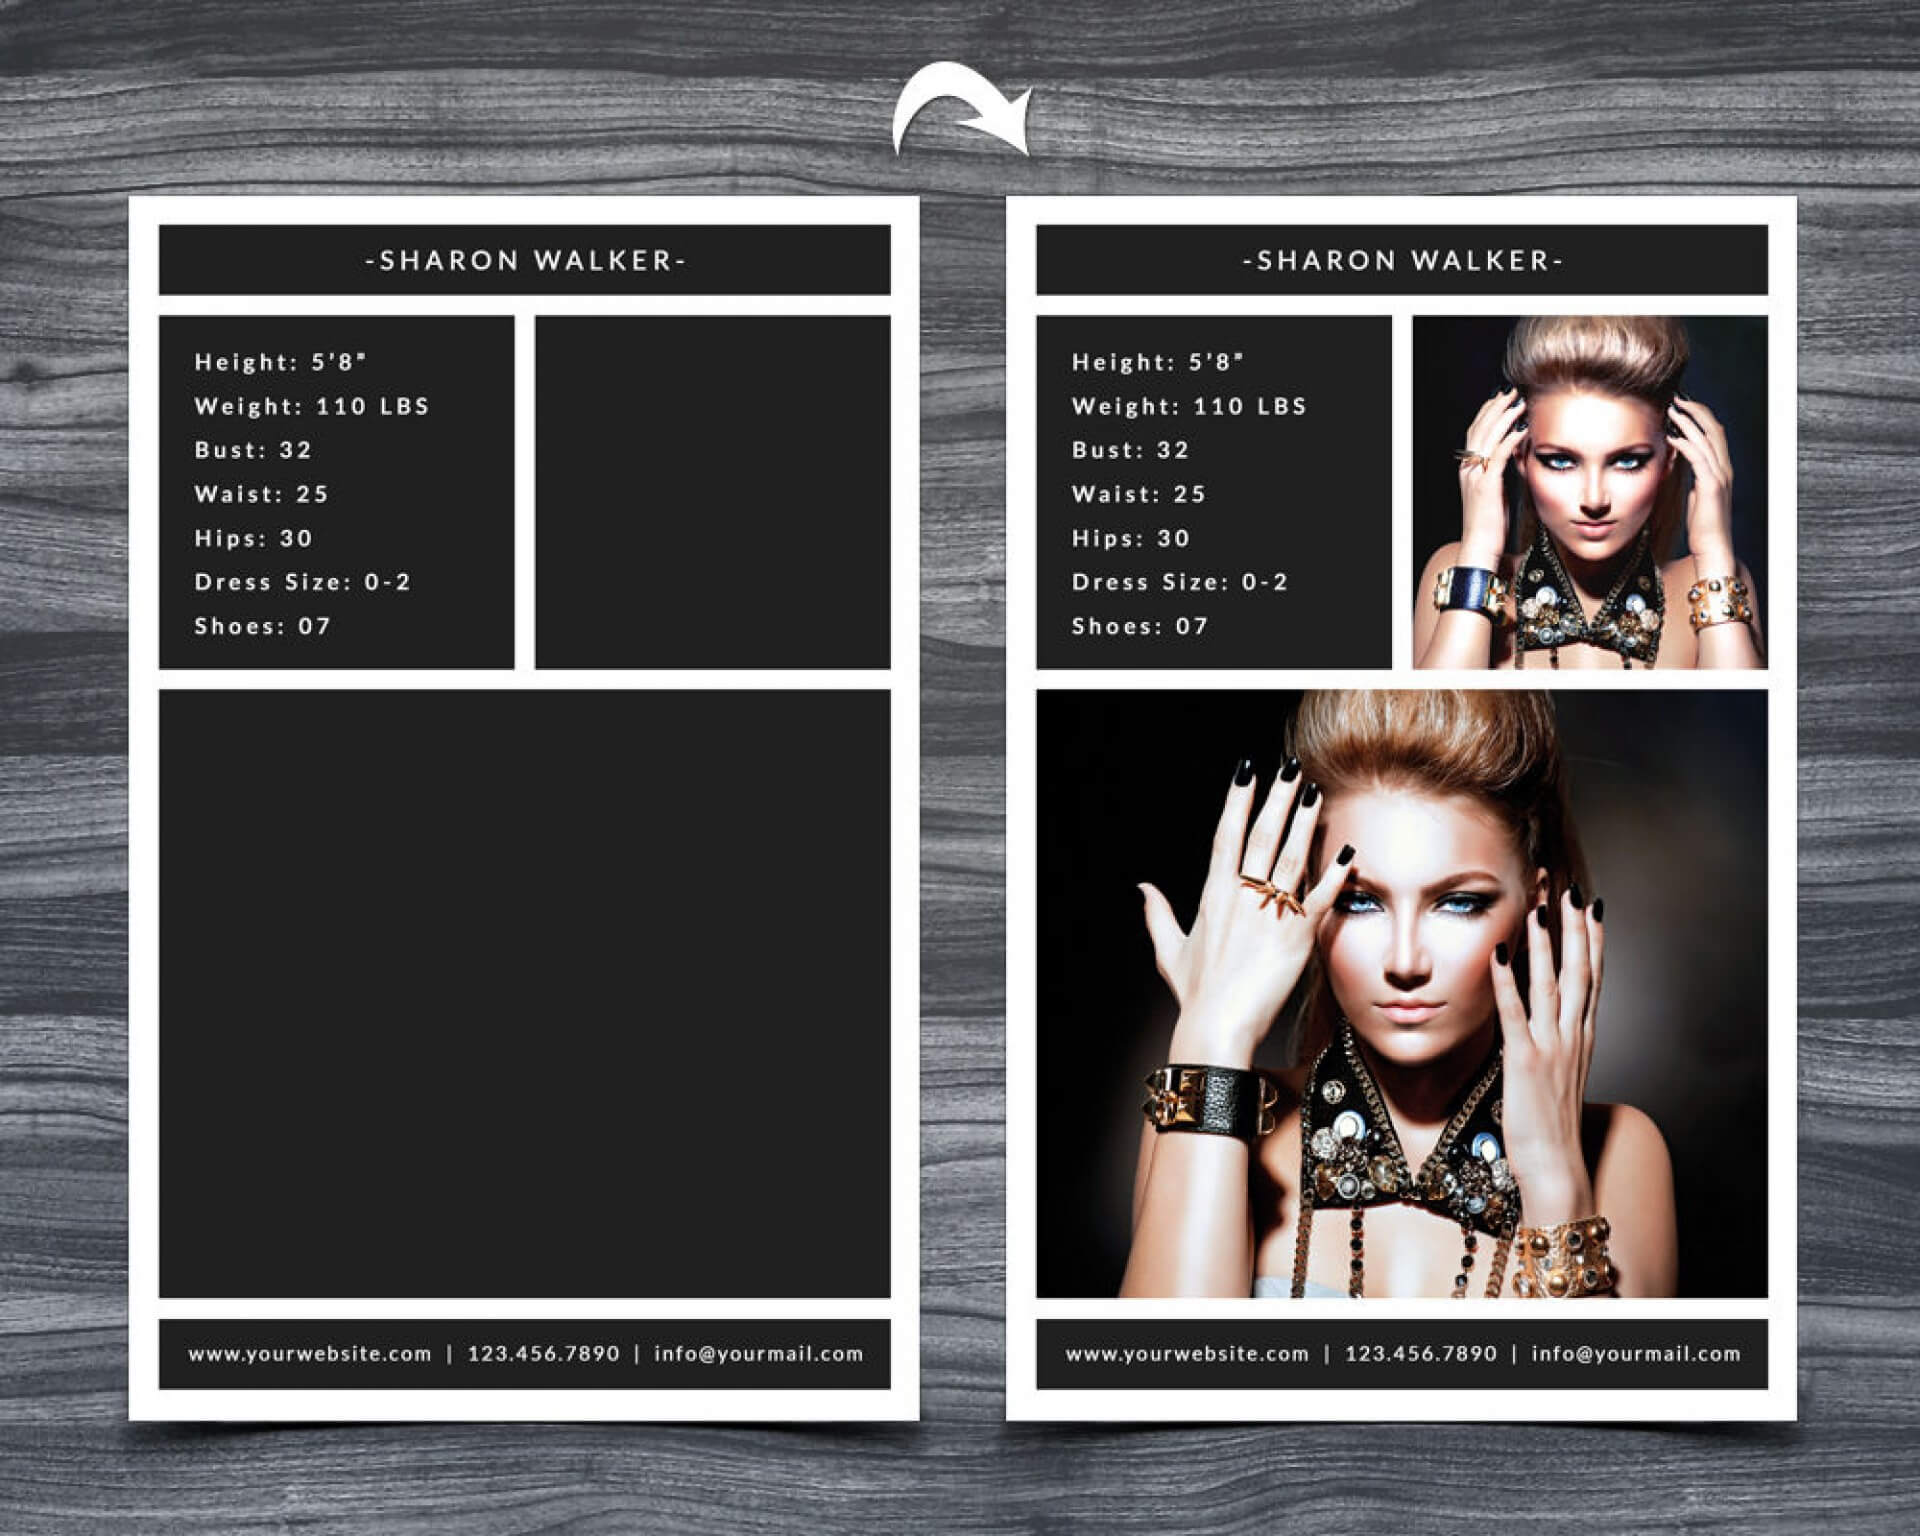 005 Model Comp Card Template Ideas Outstanding Psd Online Pertaining To Comp Card Template Download